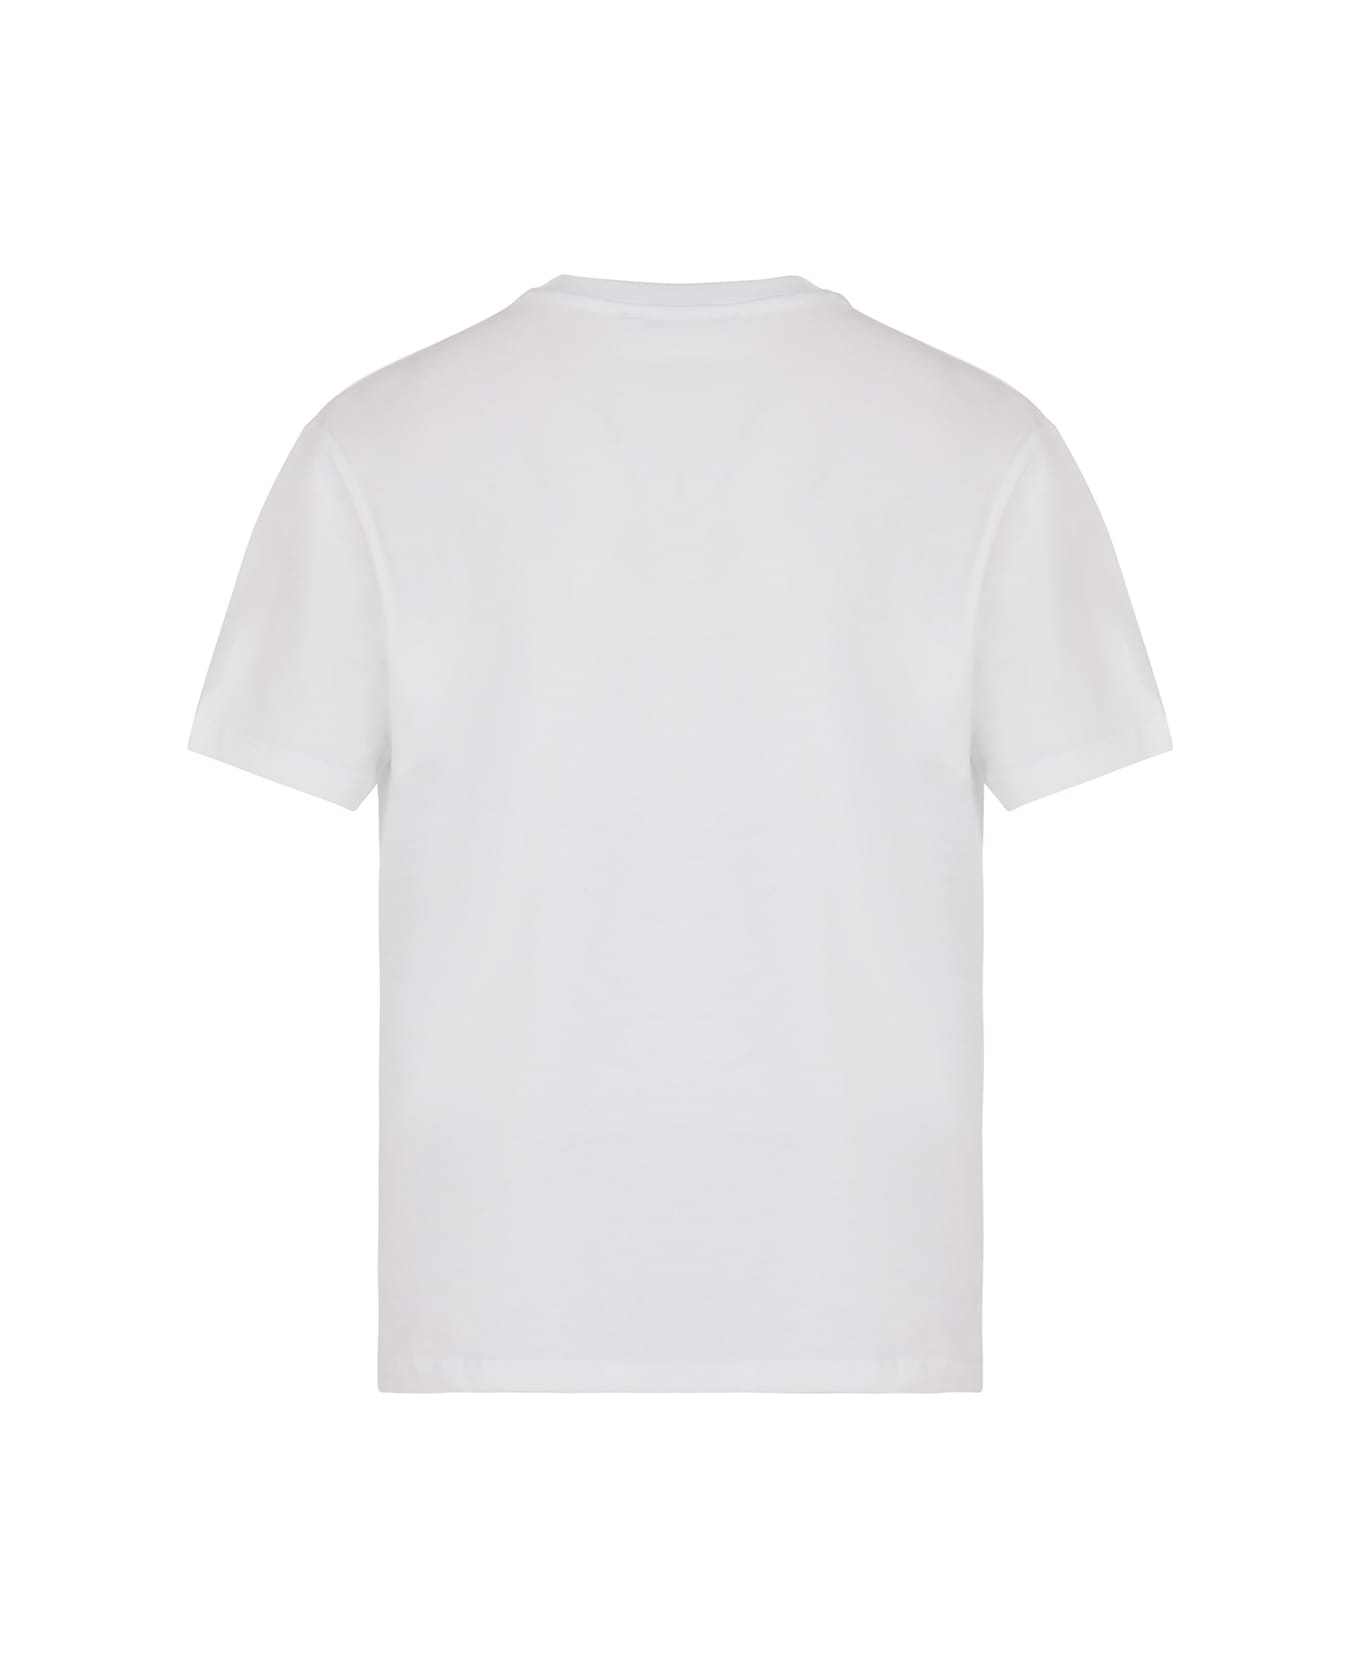 MSGM T-shirt With Print - White Tシャツ＆ポロシャツ